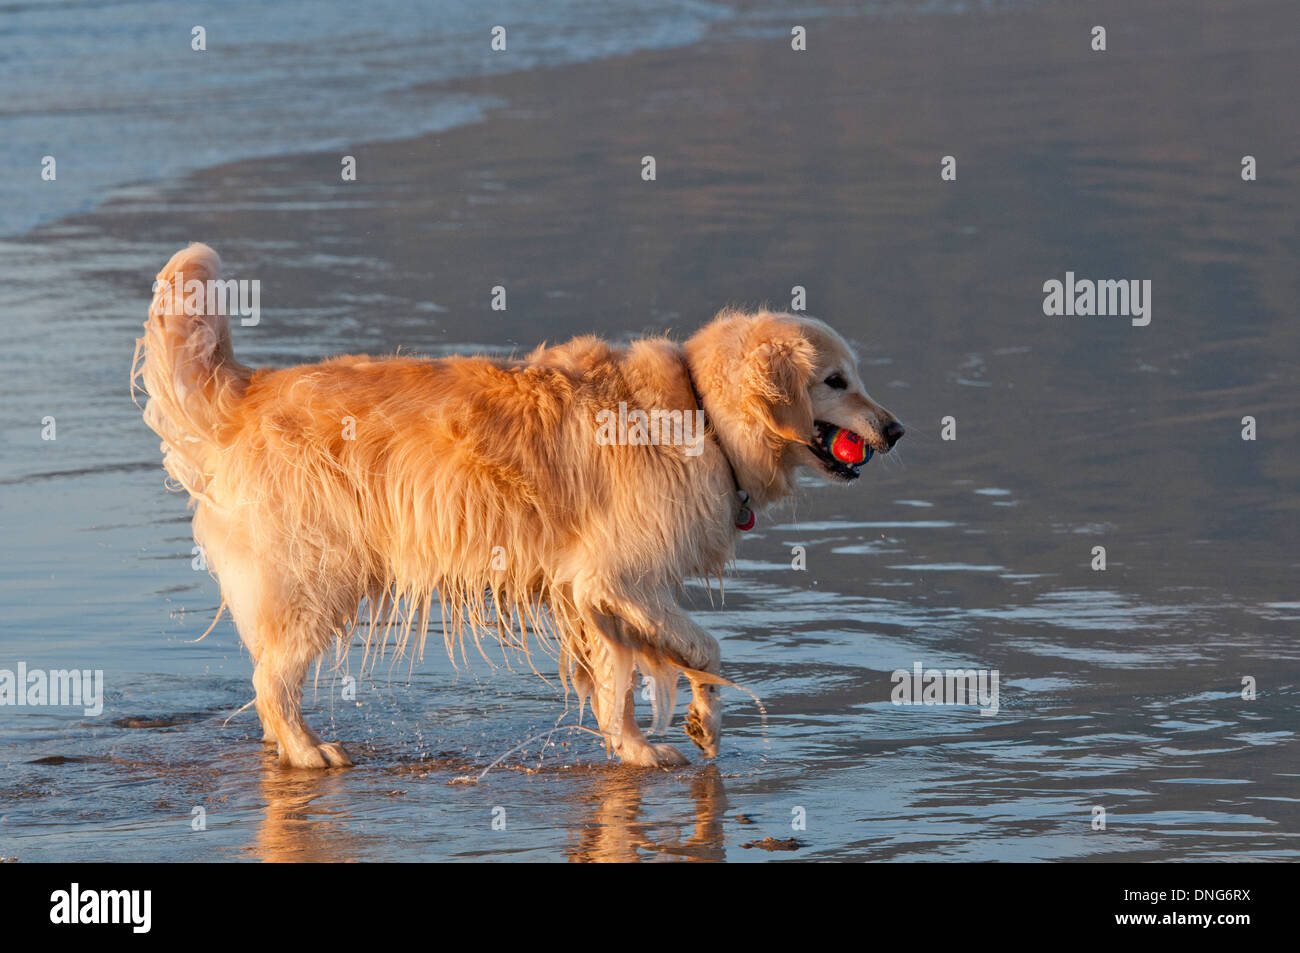 Golden retriever playing in surf Stock Photo